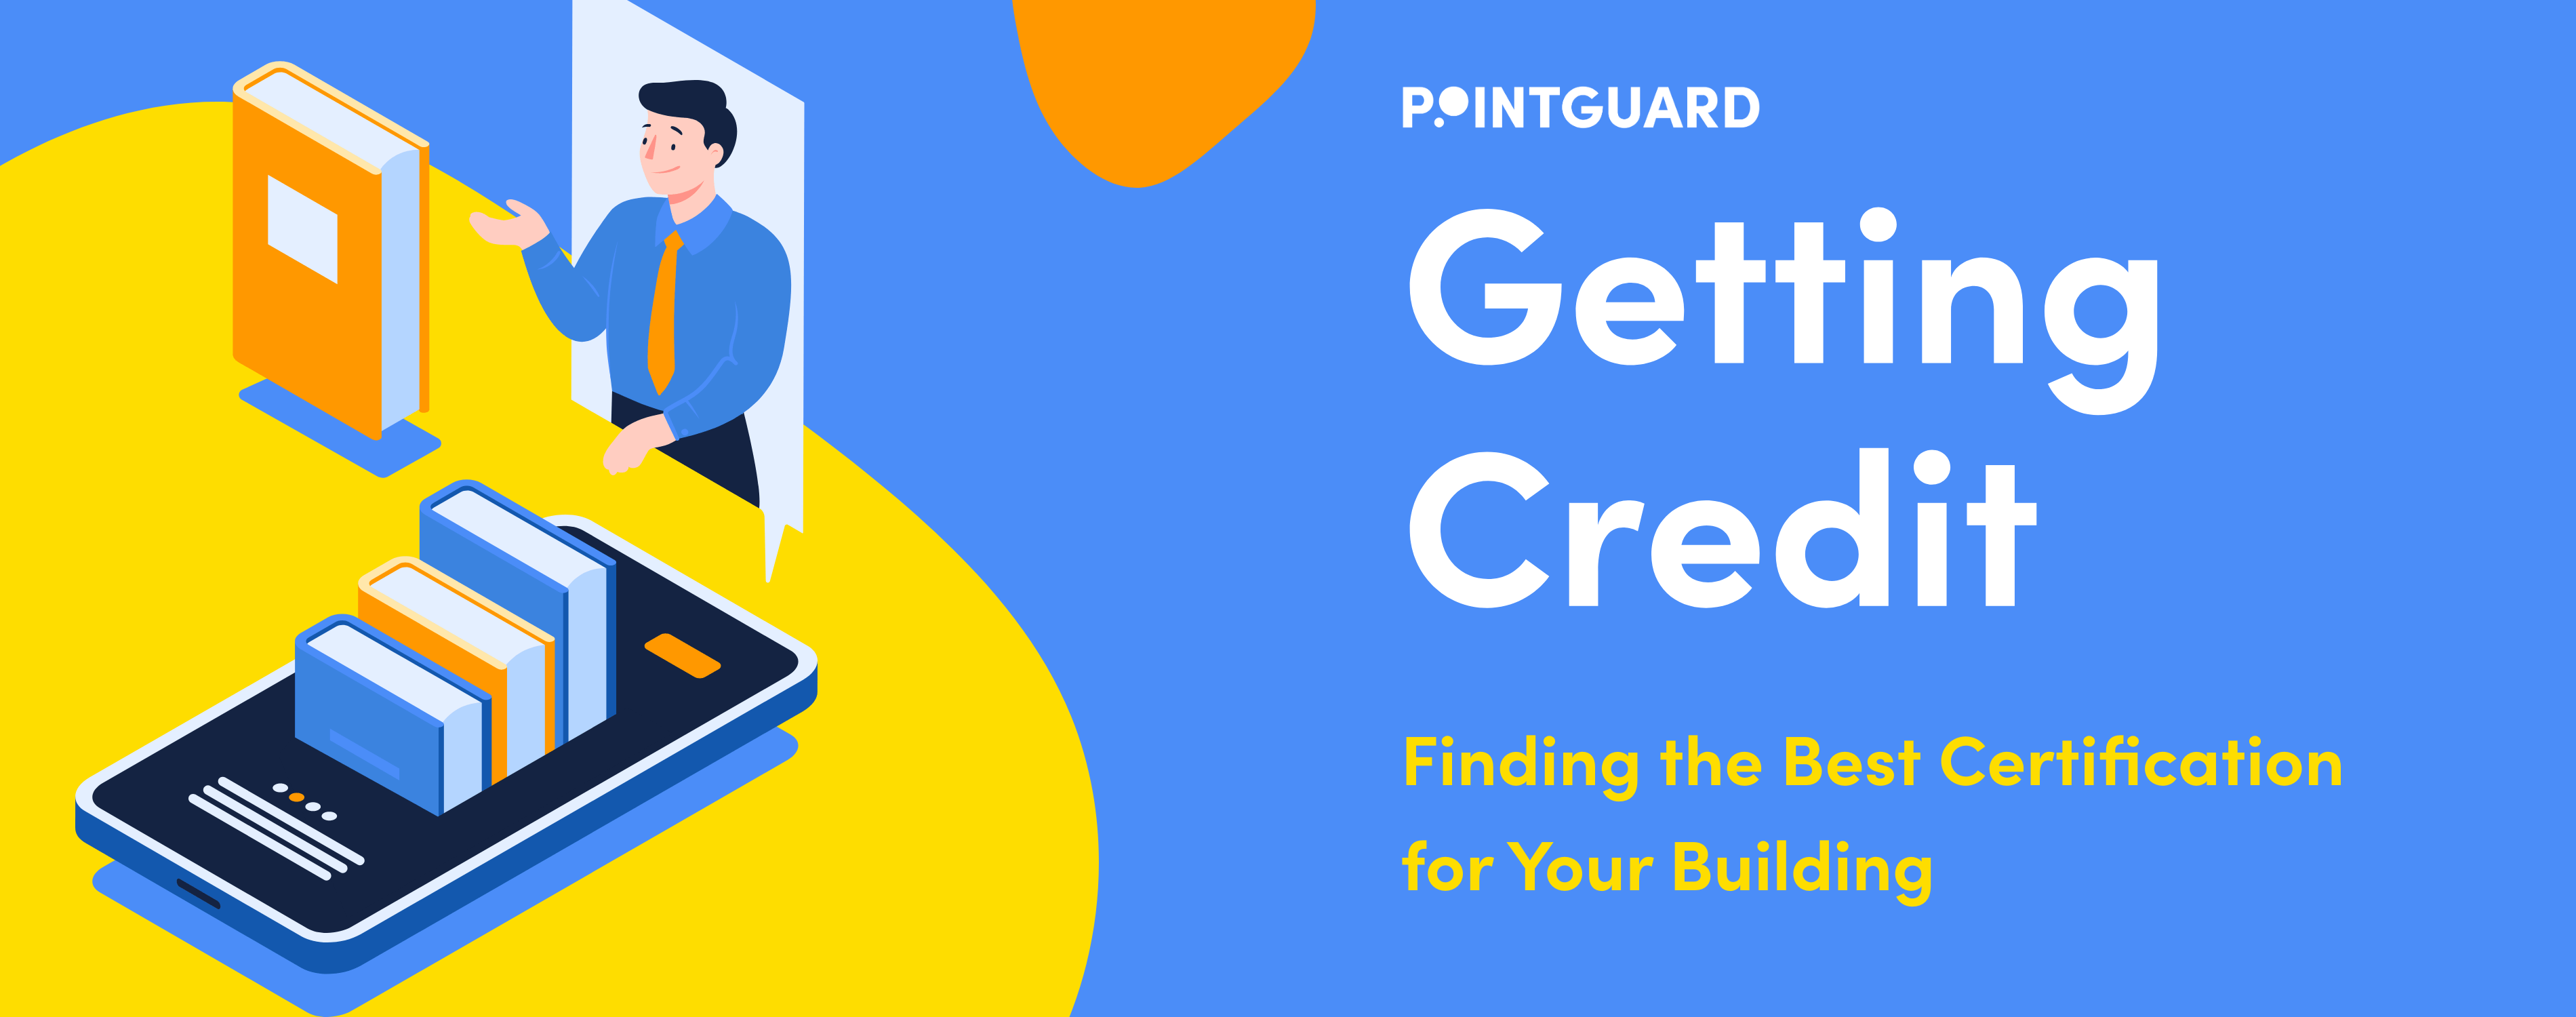 Getting Credit: Finding the Best Certification for Your Building